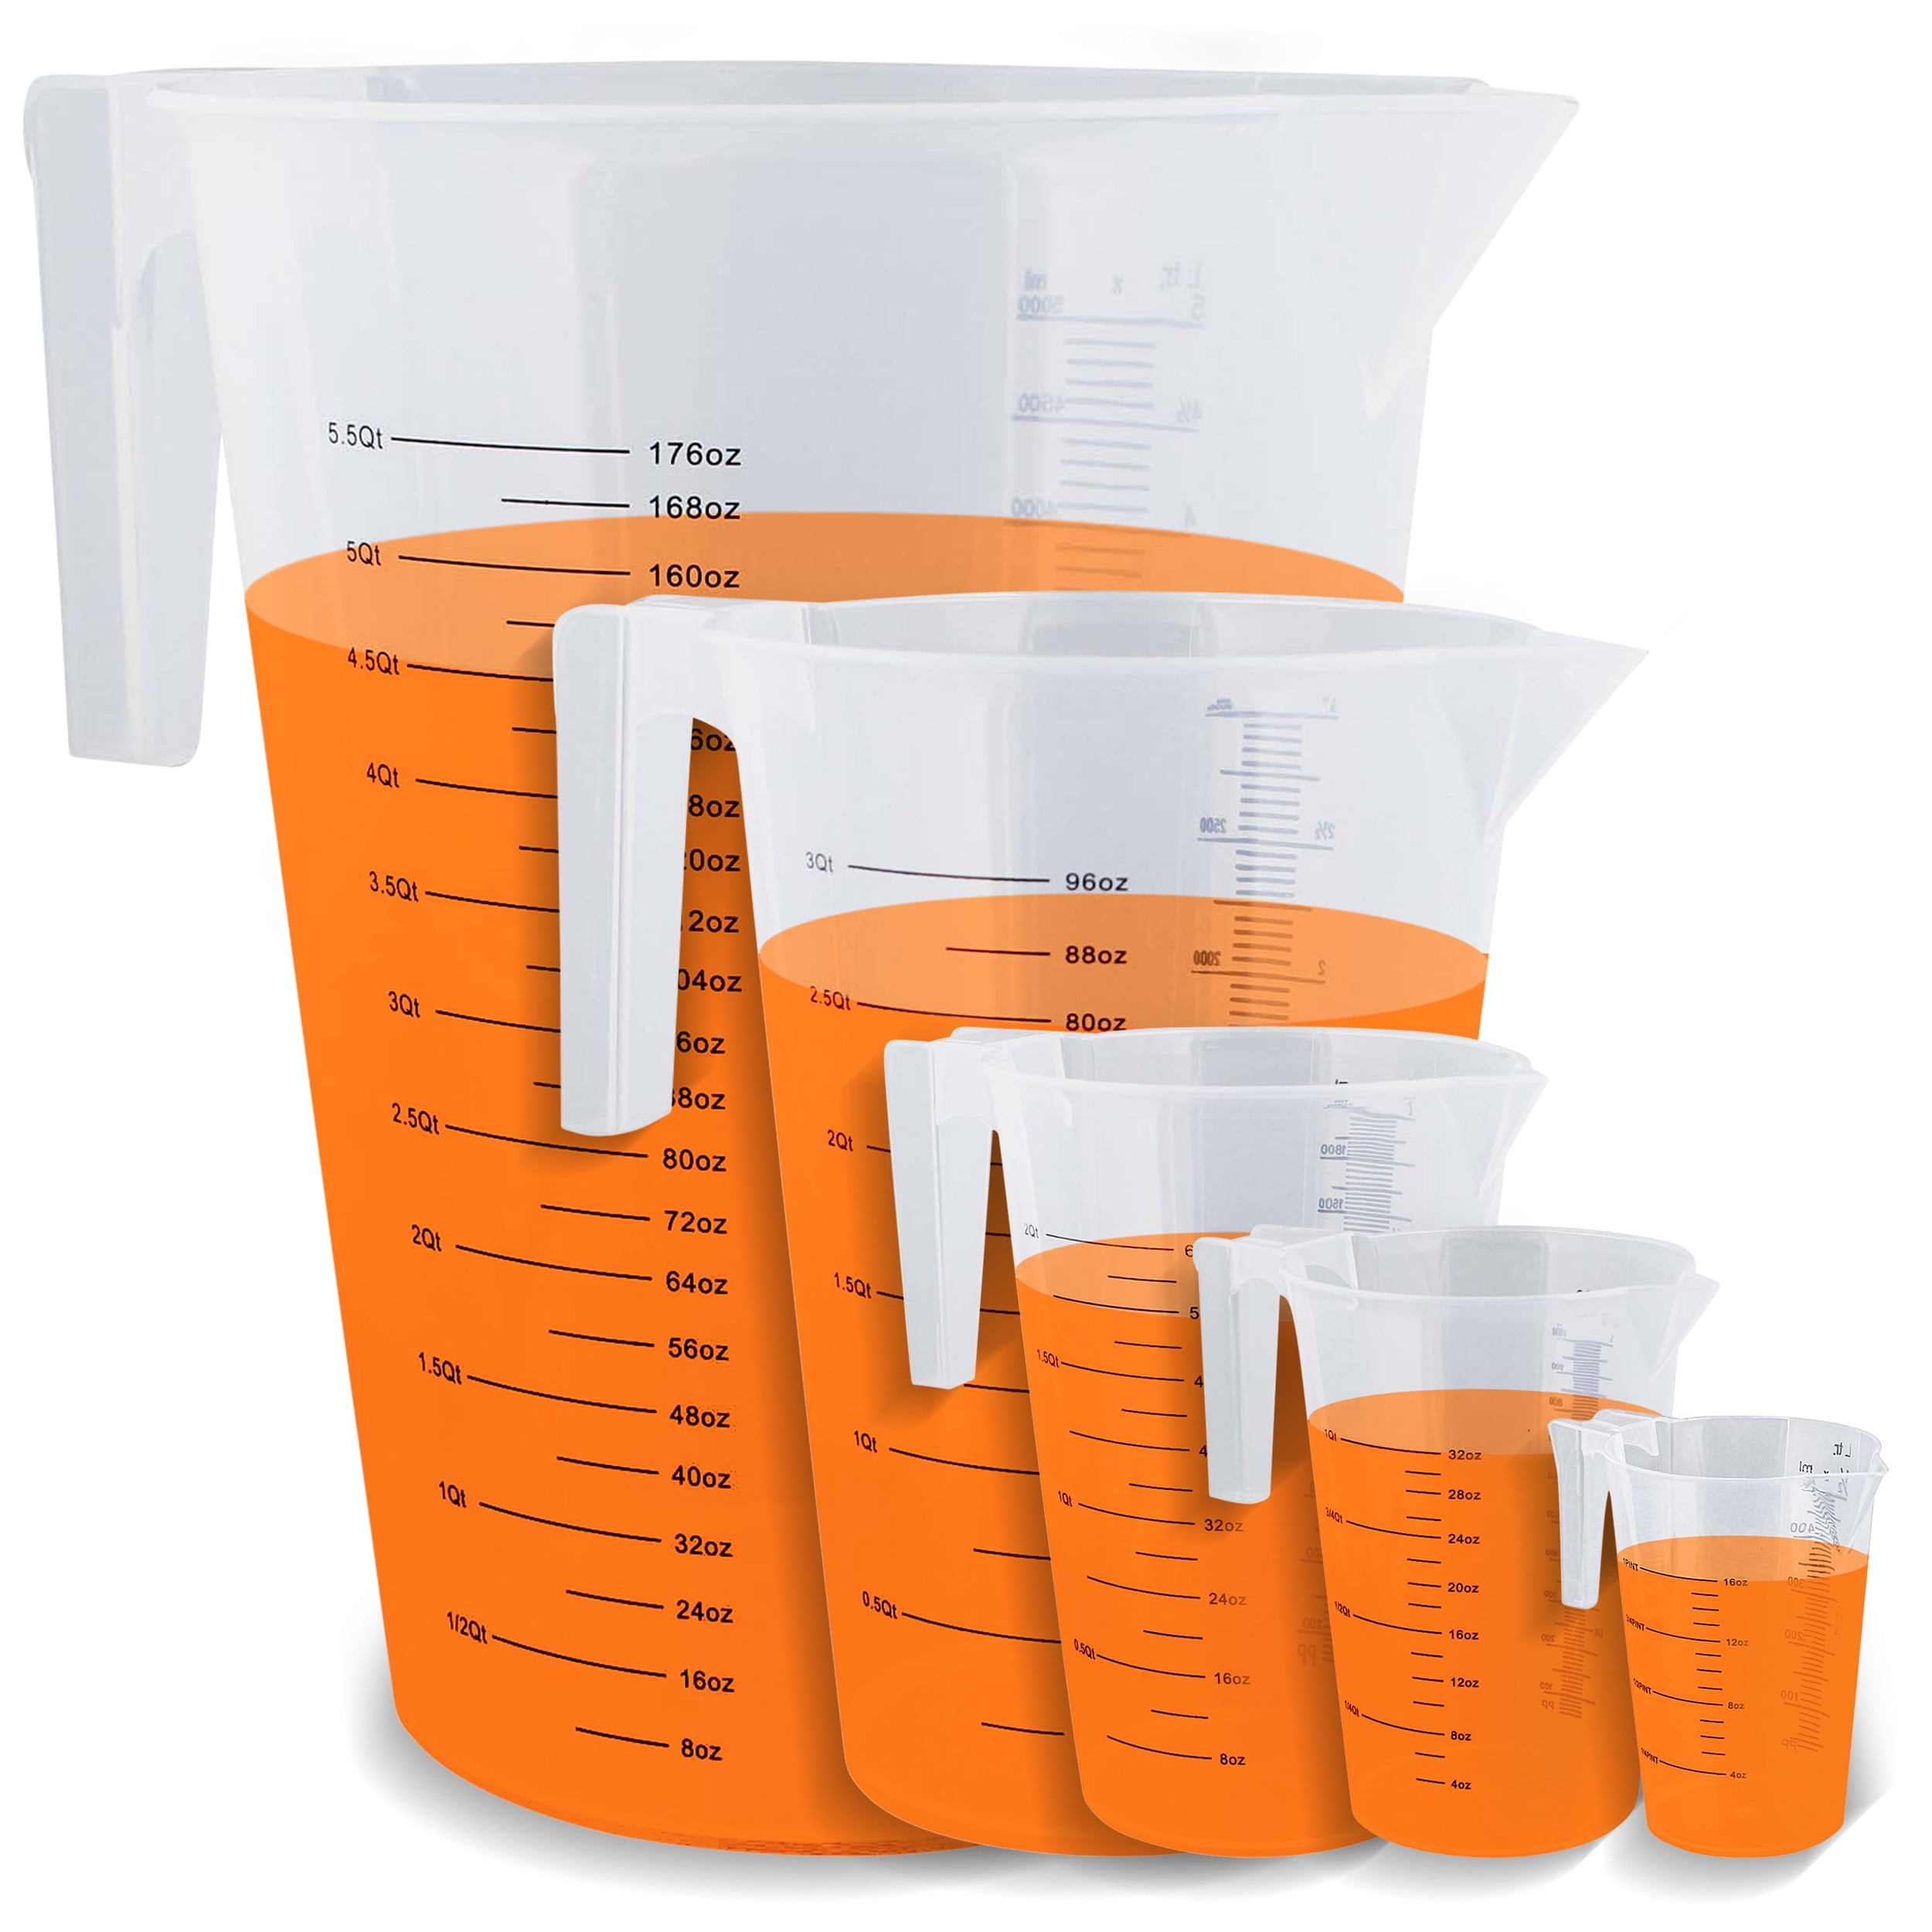 ABN Automotive Paint Mixing Cups - 100 Pack 64oz Plastic Measuring Mixing  Cups for Epoxy Resin, Activators, and Thinners with 12 Lids